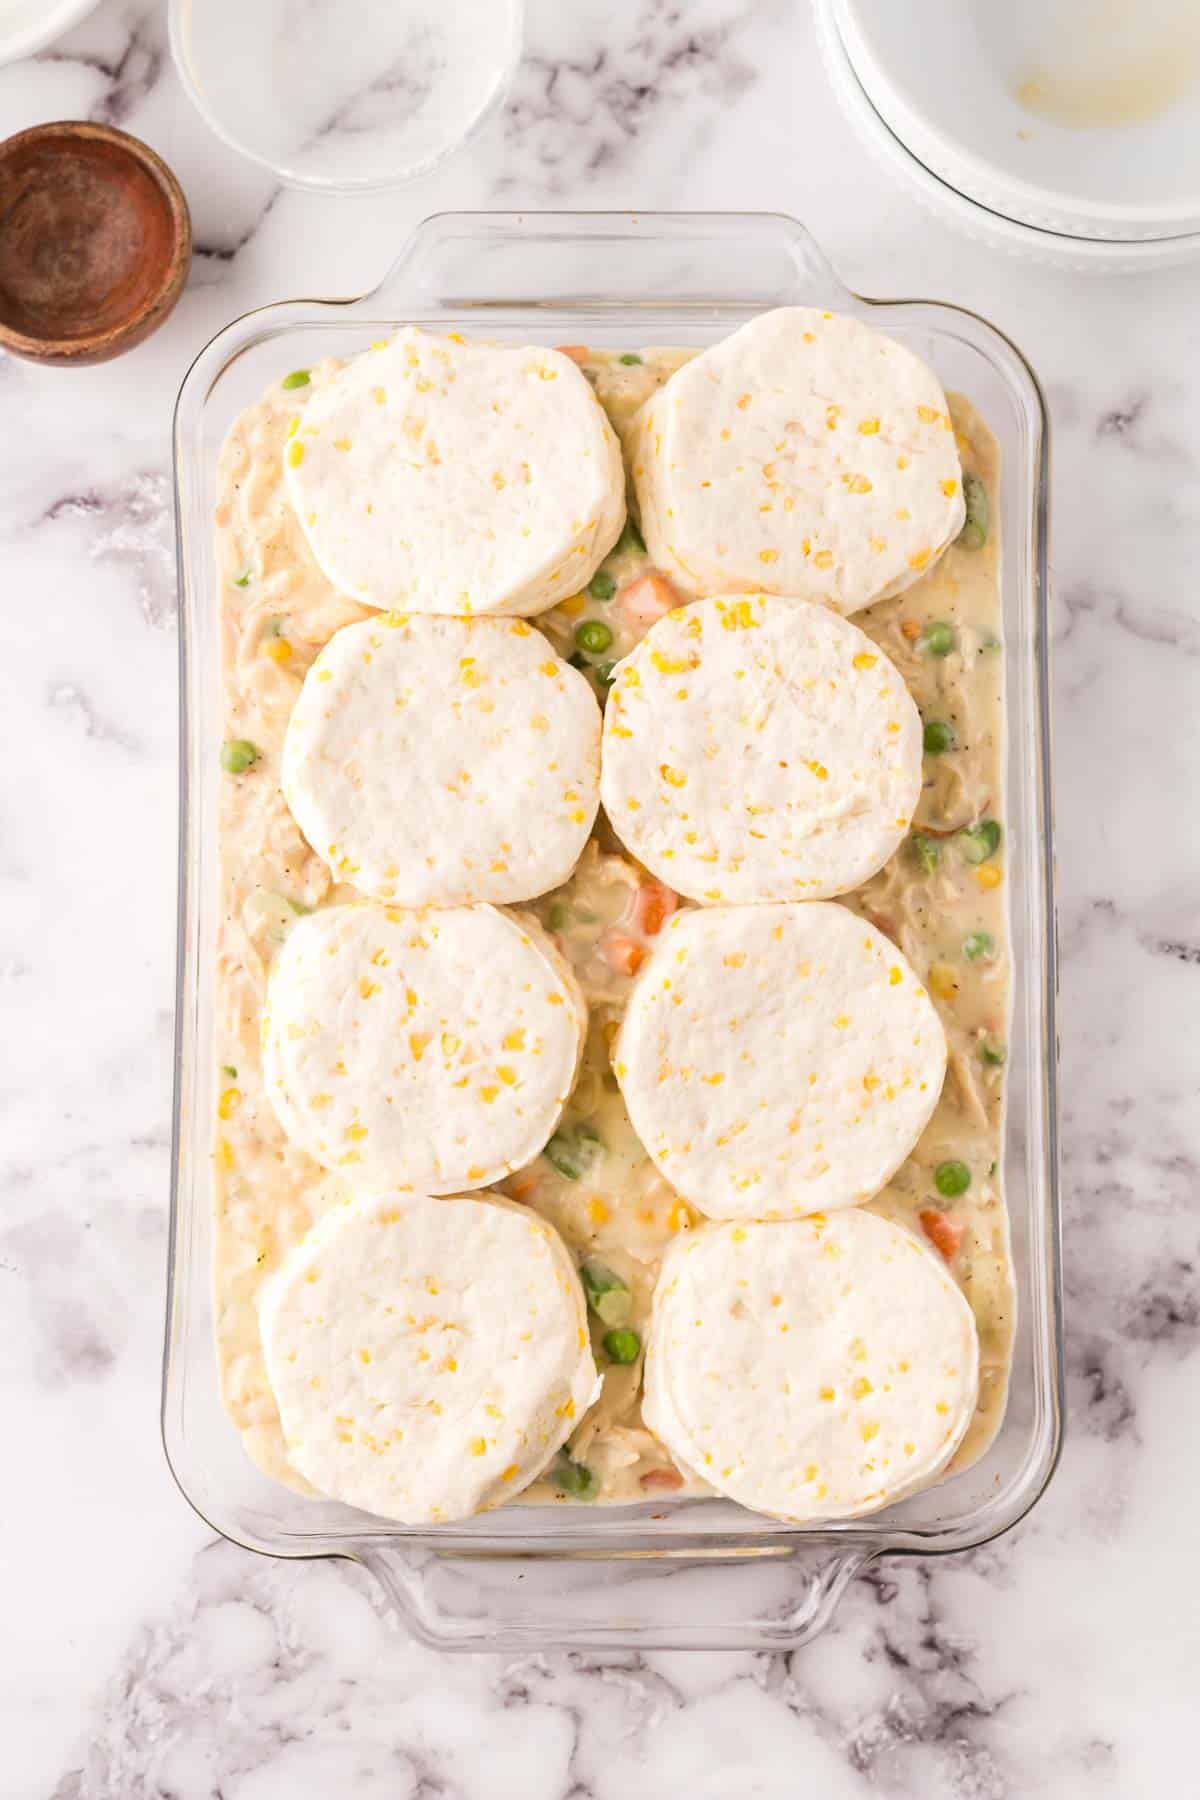 Chicken pot pie casserole topped with raw biscuits ready to bake.